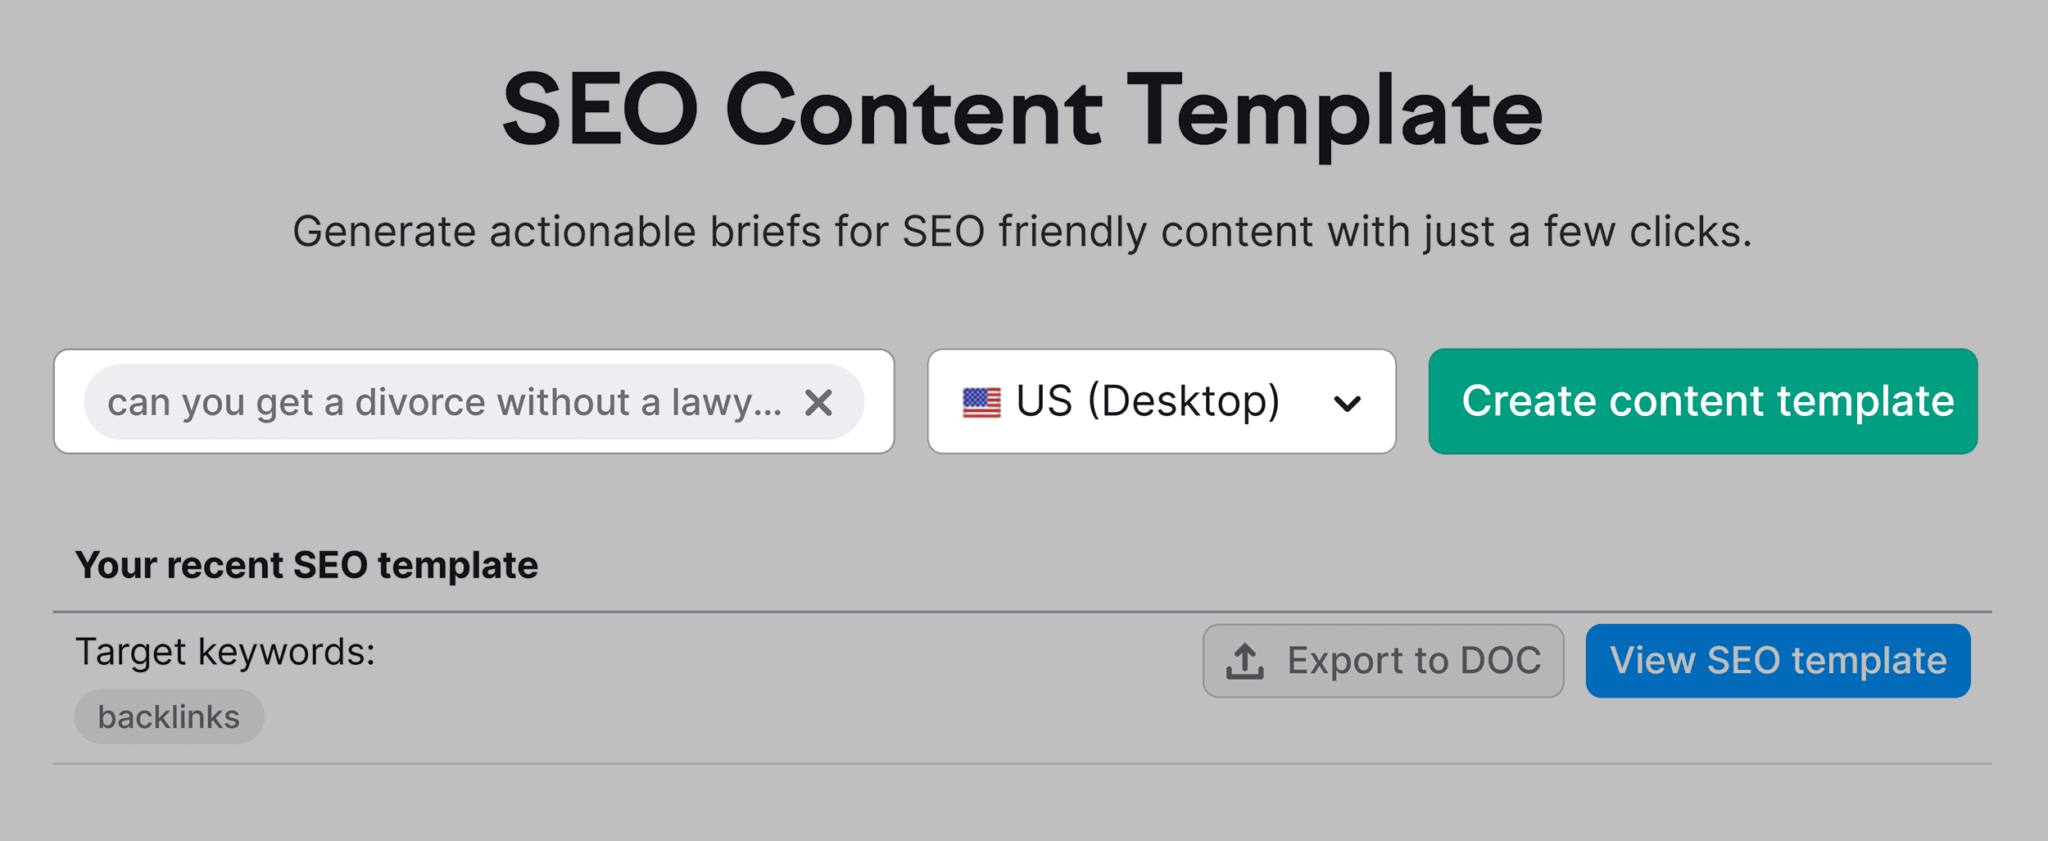 seo-content-template Law Firm SEO: A 5-Step Guide to Getting More Leads and Clients